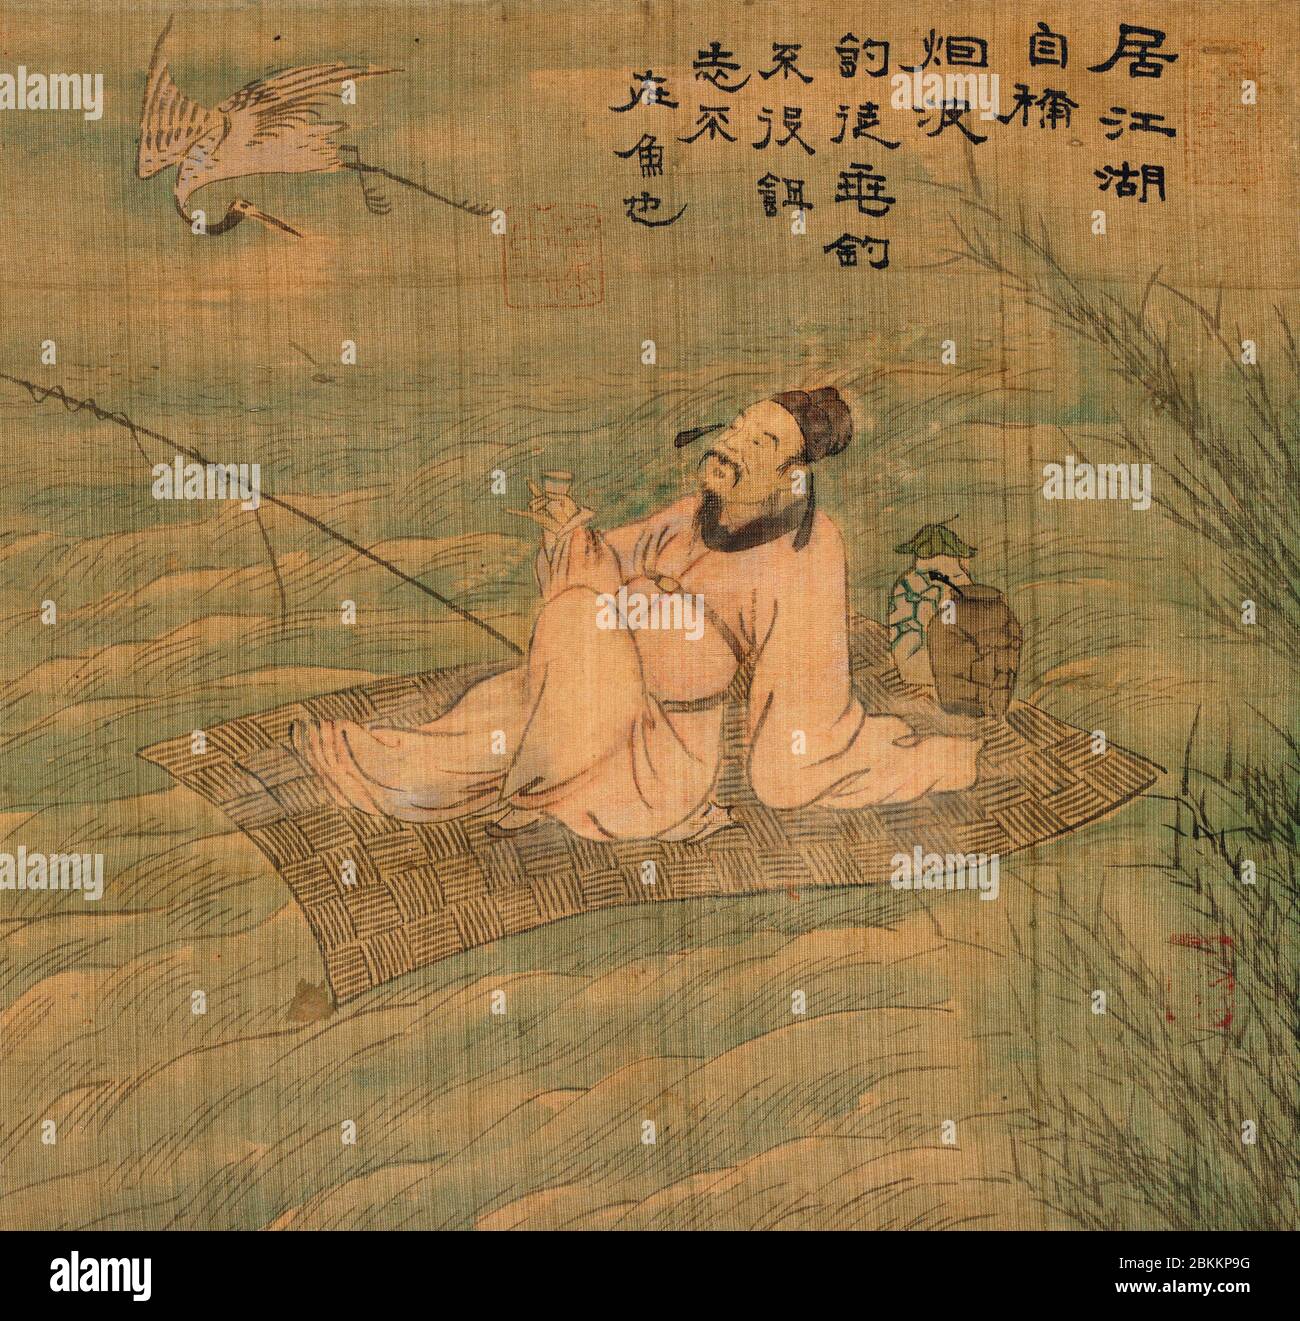 Poet Fisherman - 1800s Korean Art - Depicts the 8th-century Chinese official and Daoist scholar Zhang Zhihe sitting on a raft buffeted by waves. He drinks wine from a small cup, and gazes up at a crane flying above him. Stock Photo